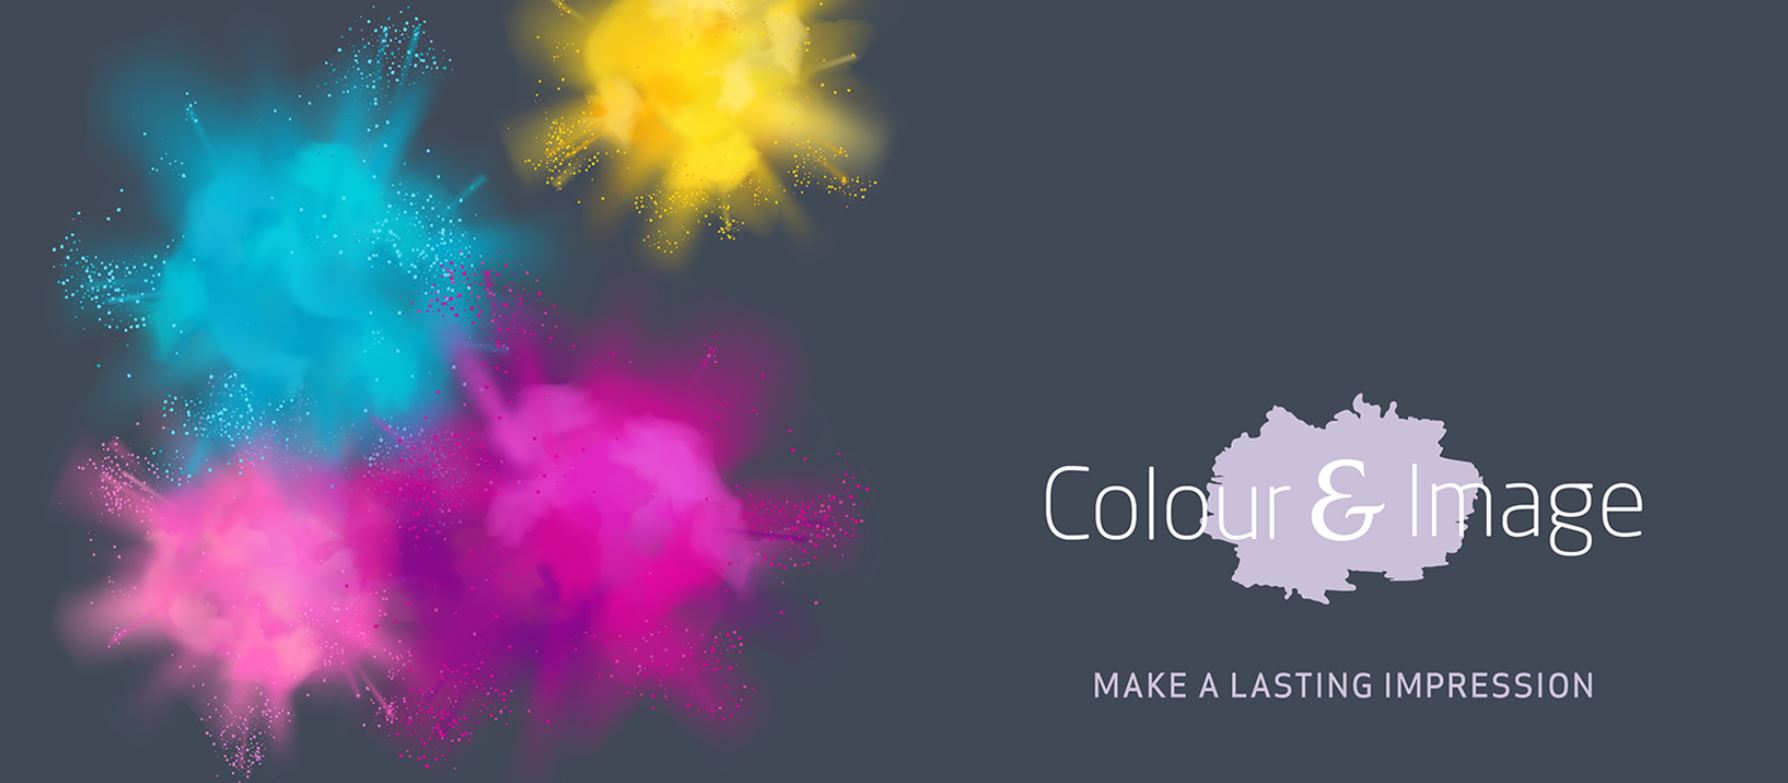 House of Colour - Colour and Image Stylist